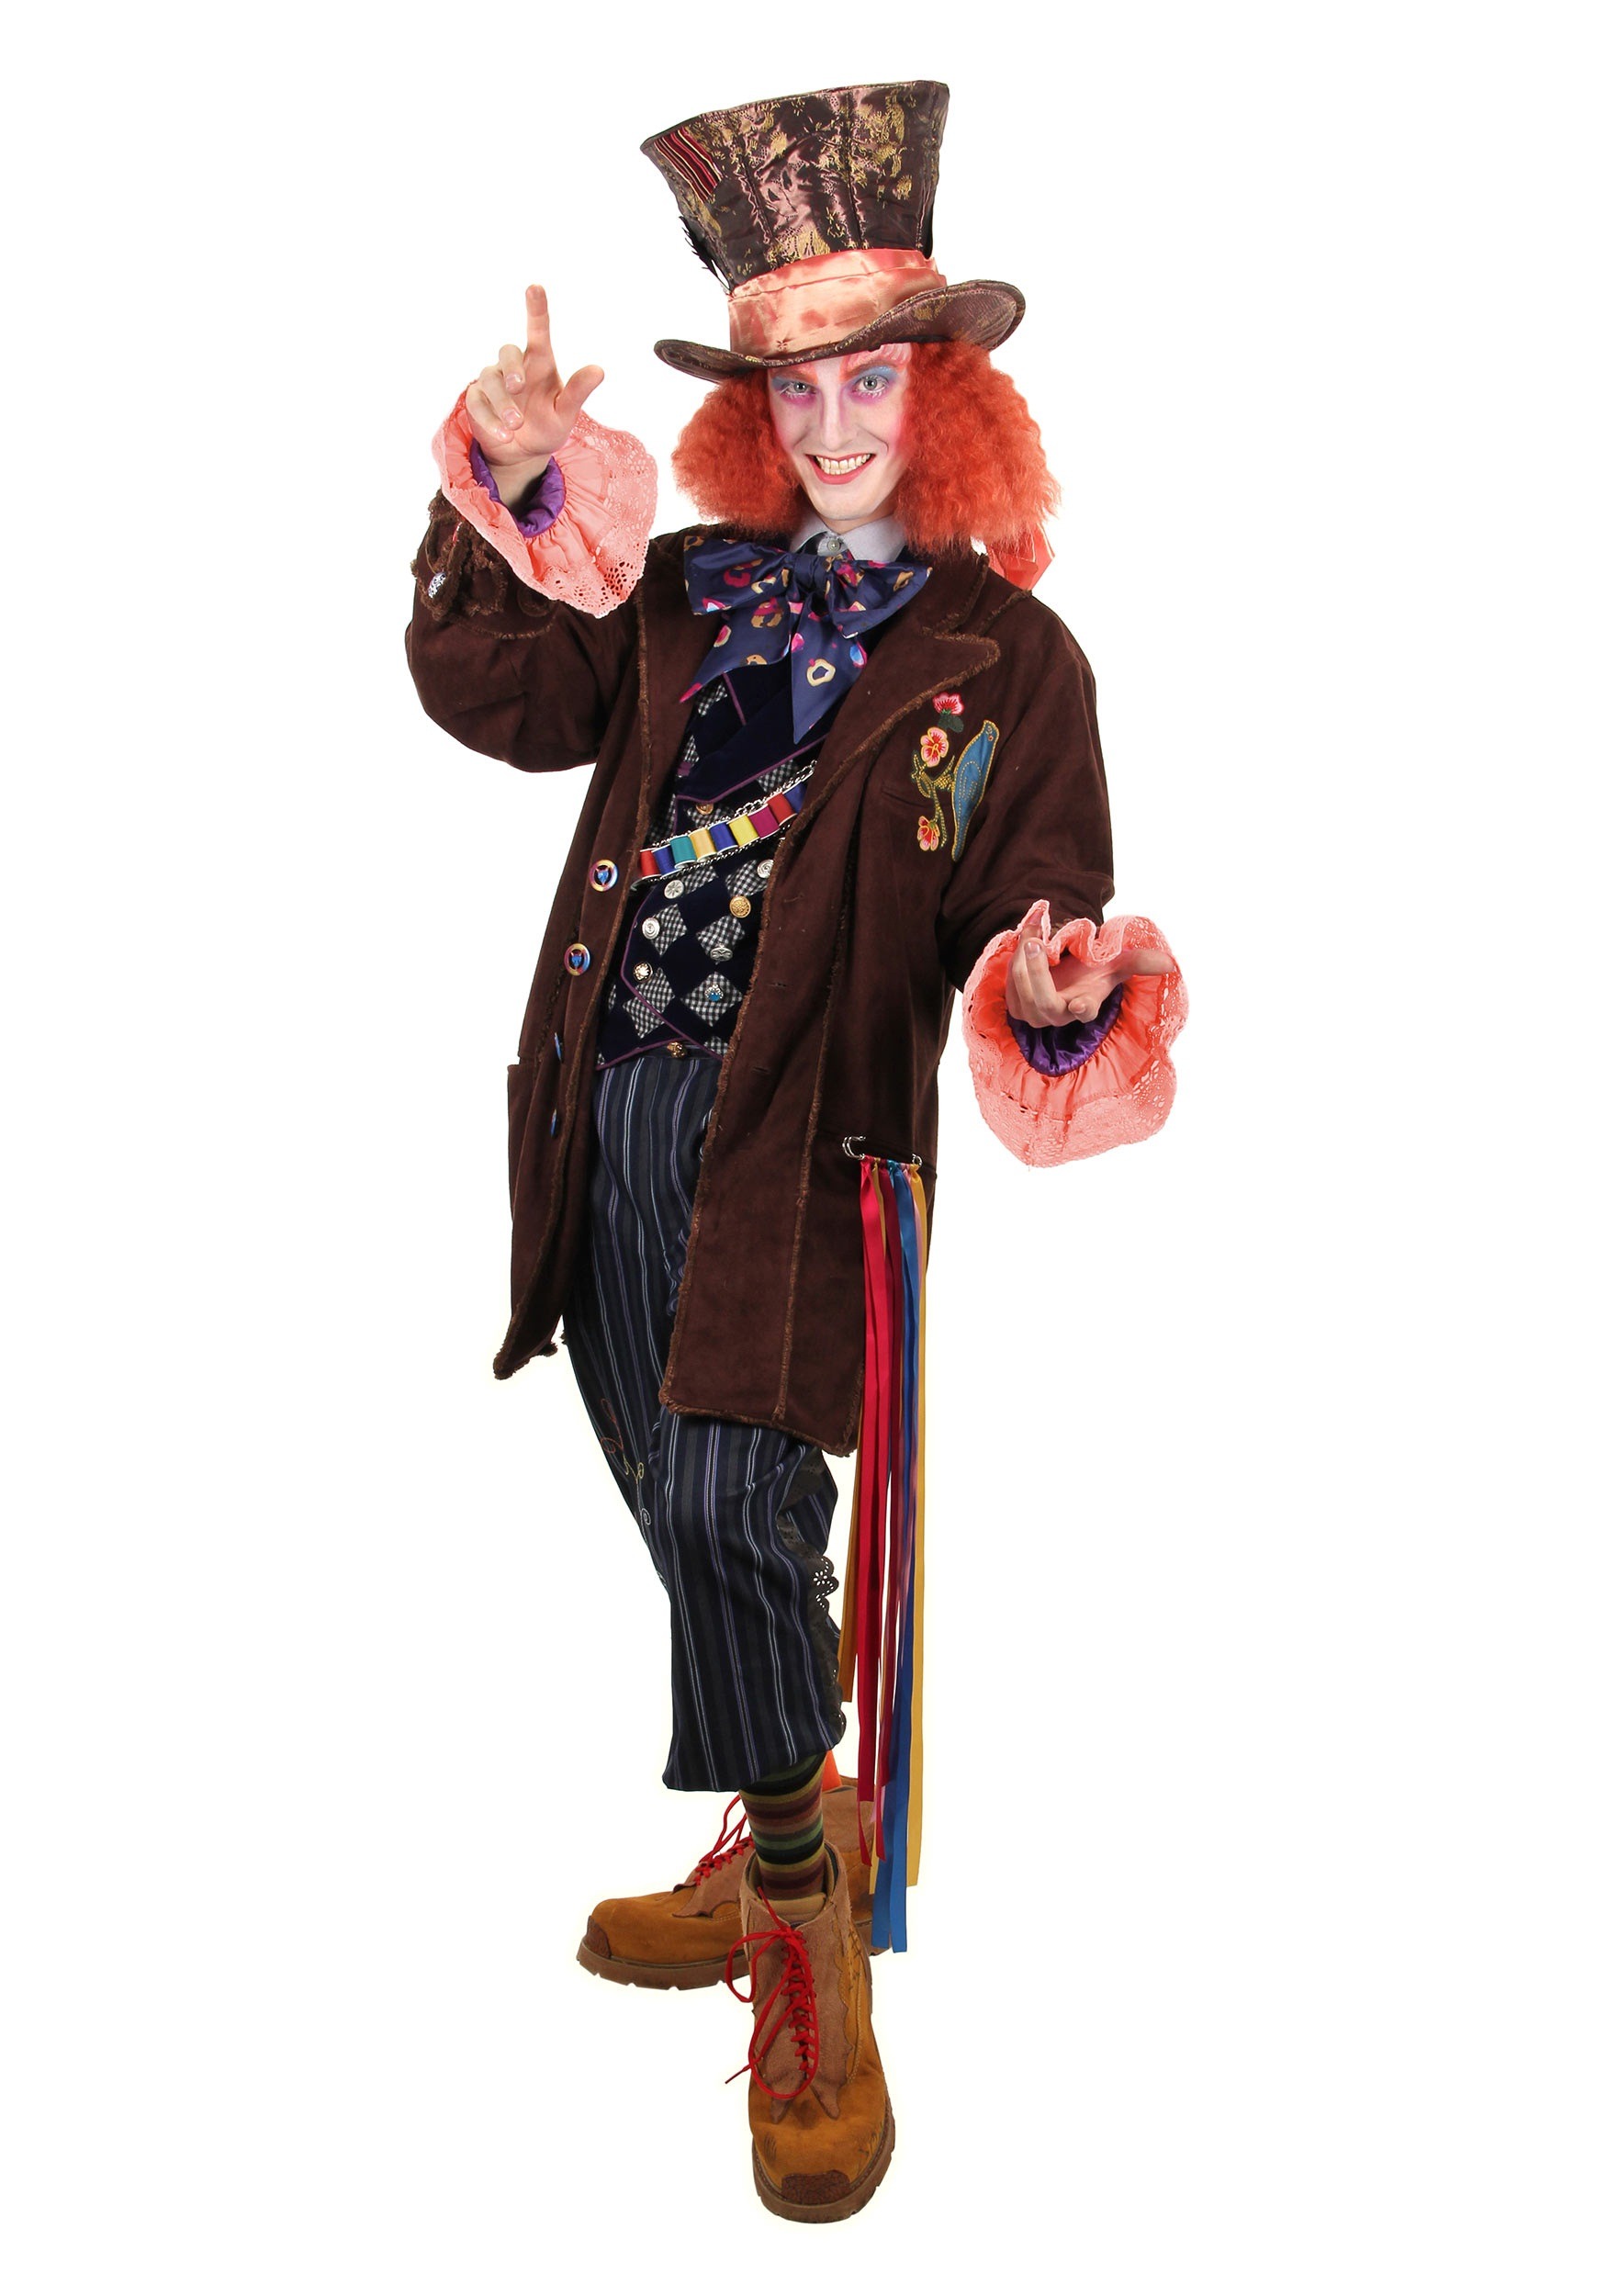 Brand New The Mad Hatter Adult Alice in Wonderland Halloween Costume 